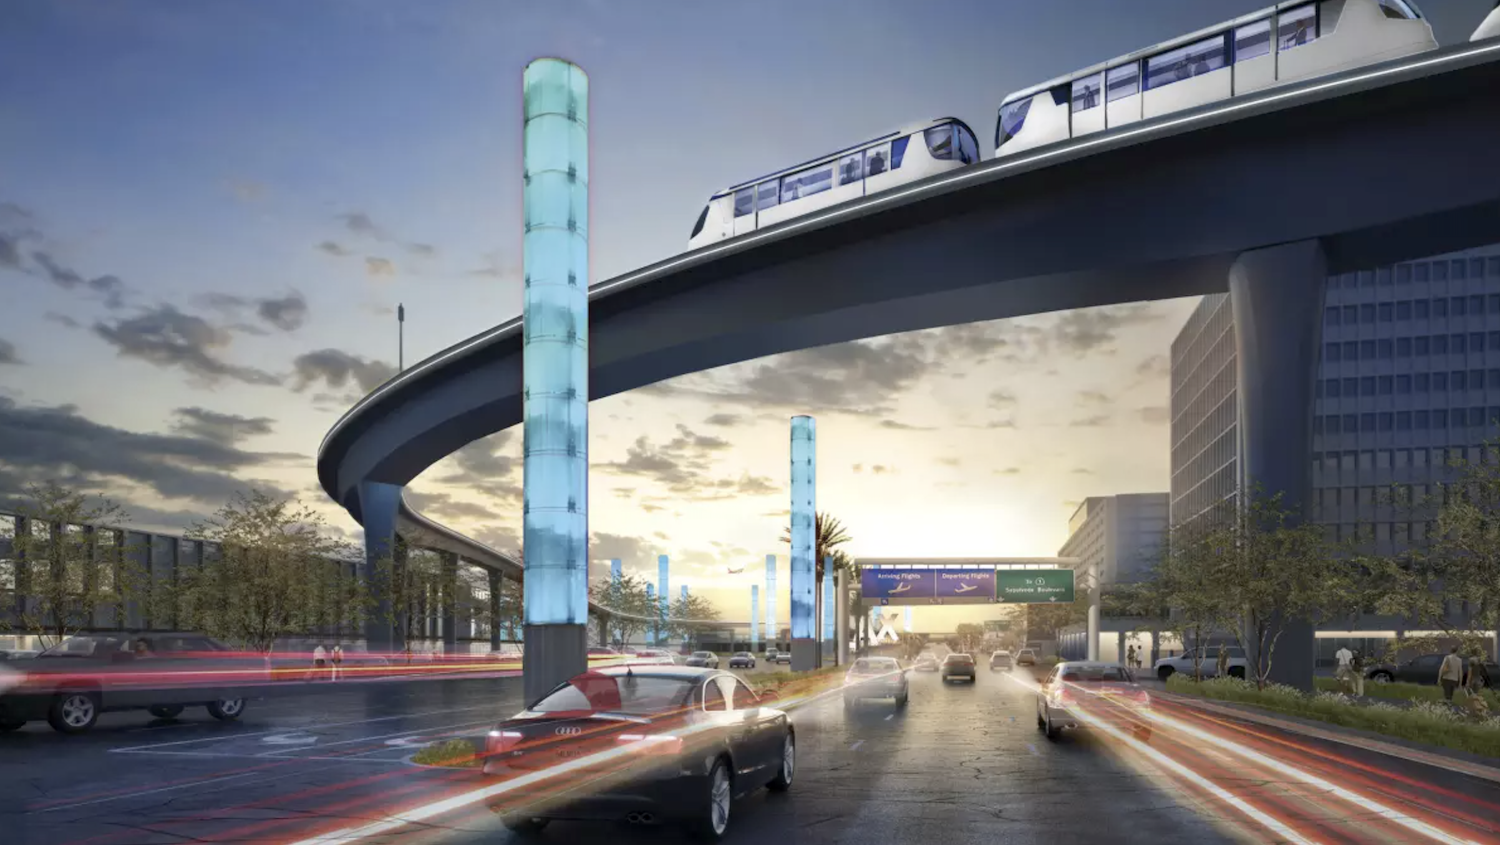 rendering of elevated train at airport